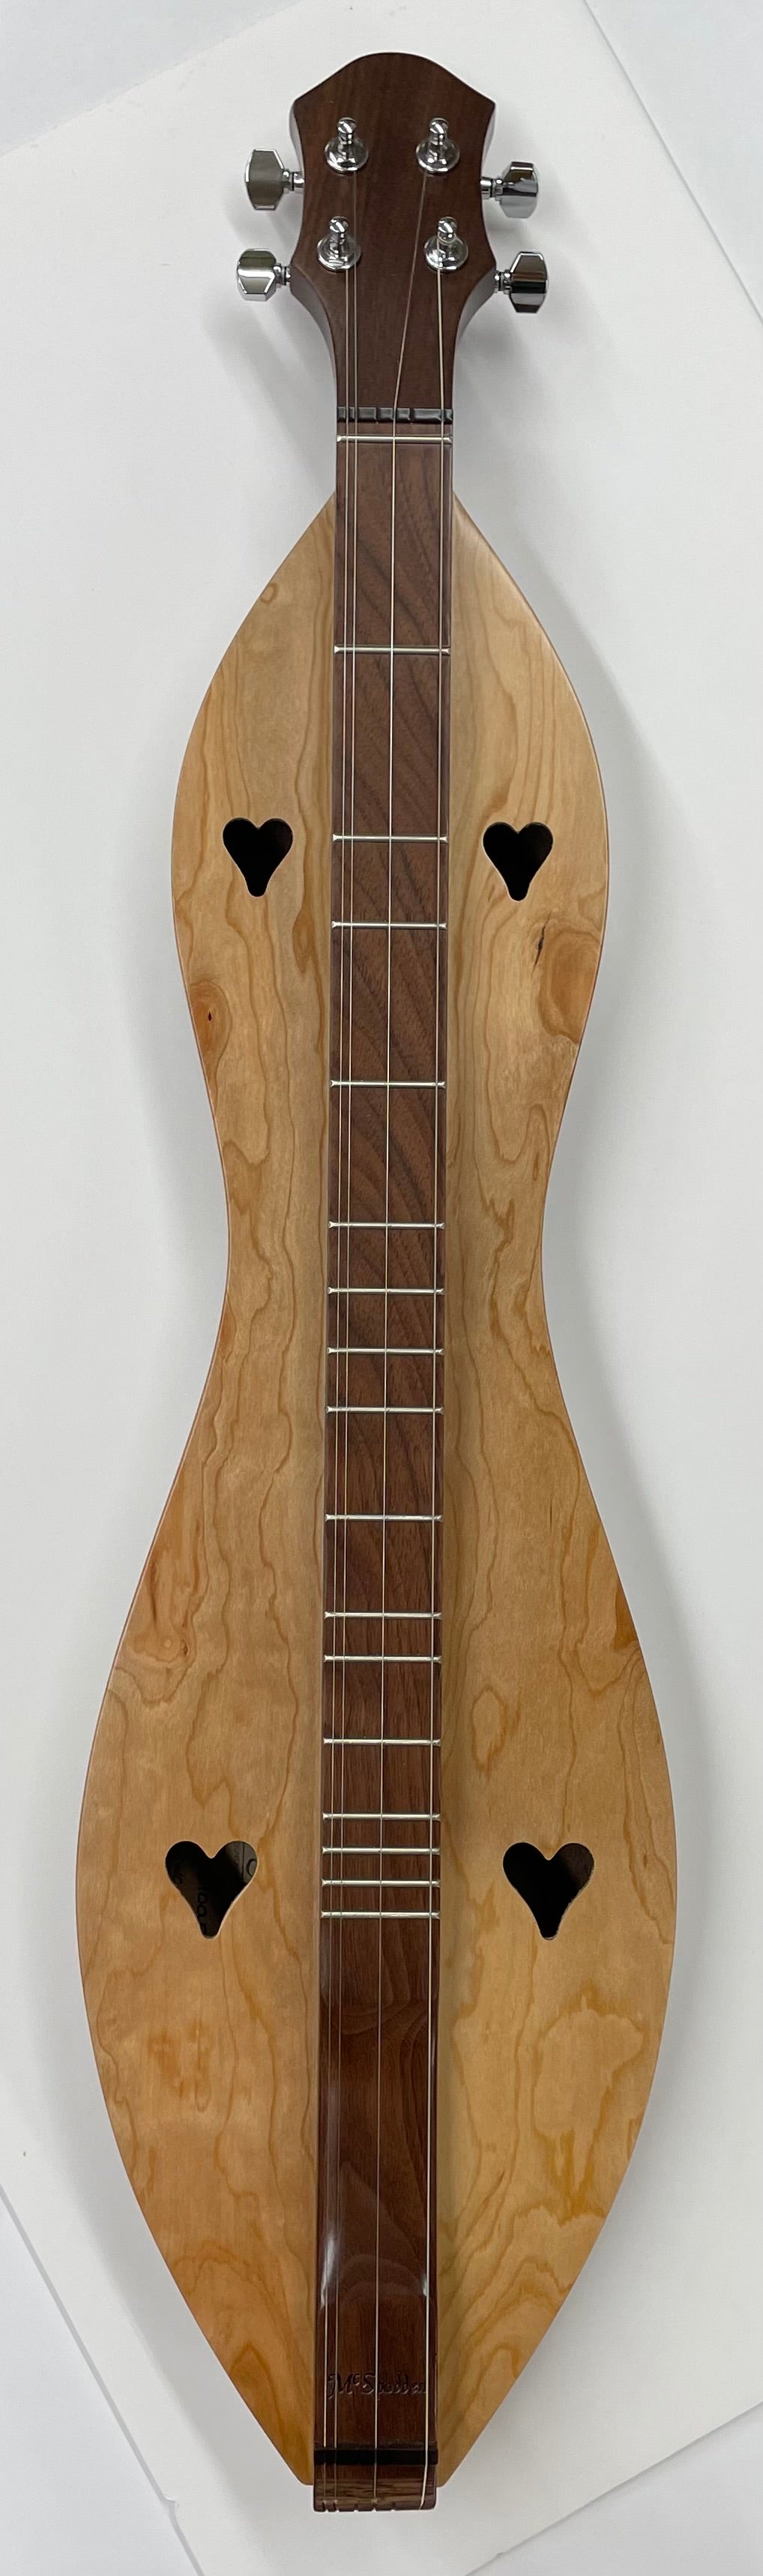 A handcrafted 4 String Ginger, Flathead Hourglass with Walnut back and sides and Cherry top (4FGWC) with heart-shaped sound holes, four strings, and tuning pegs positioned at the headstock.